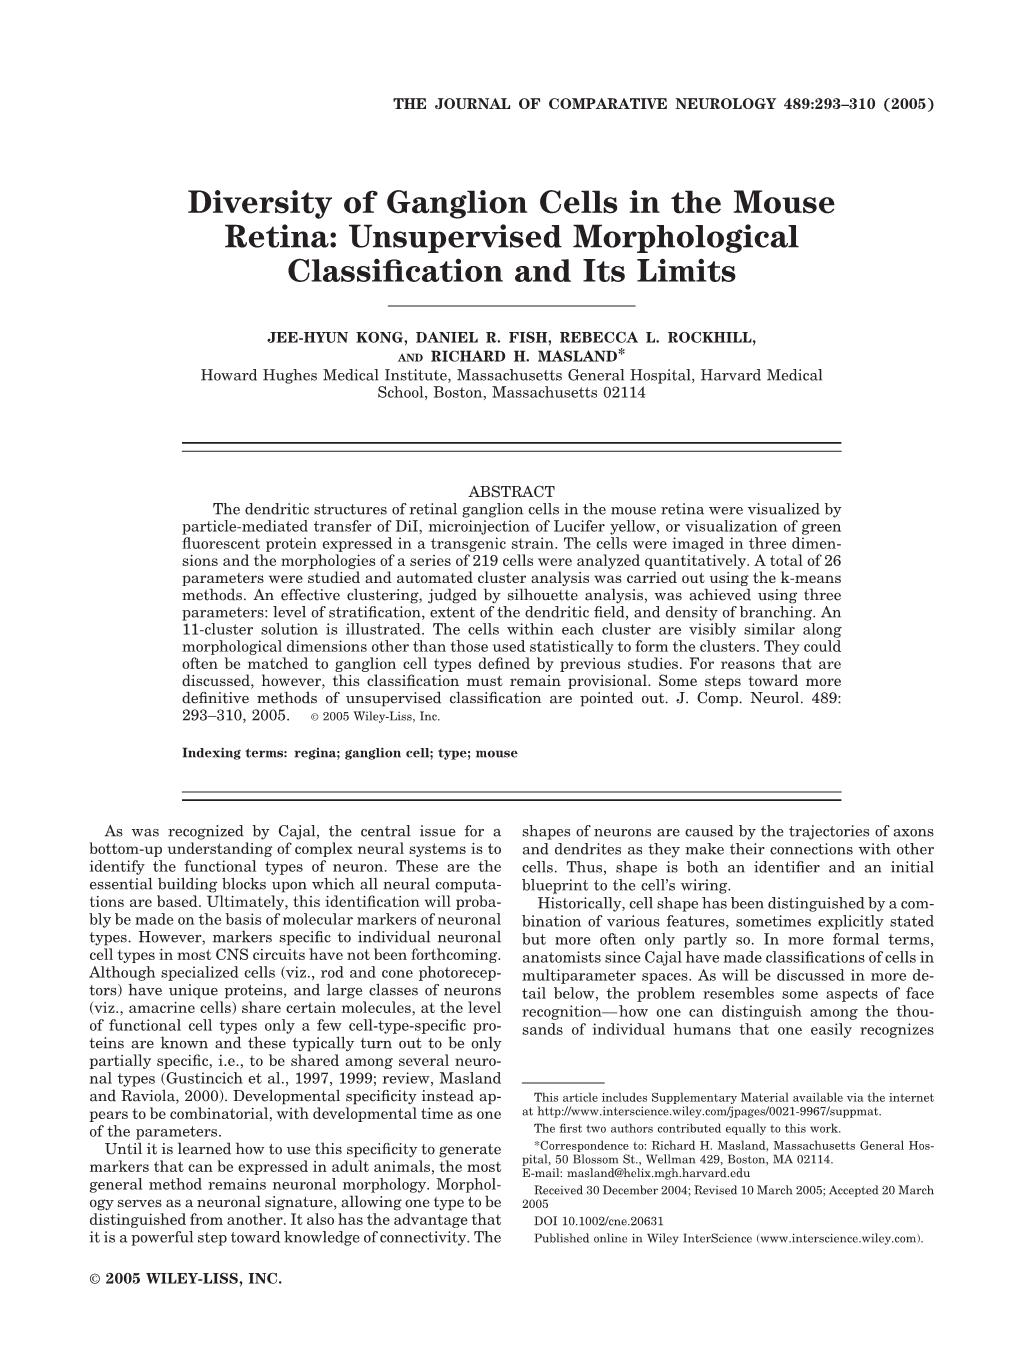 Diversity of Ganglion Cells in the Mouse Retina: Unsupervised Morphological Classiﬁcation and Its Limits